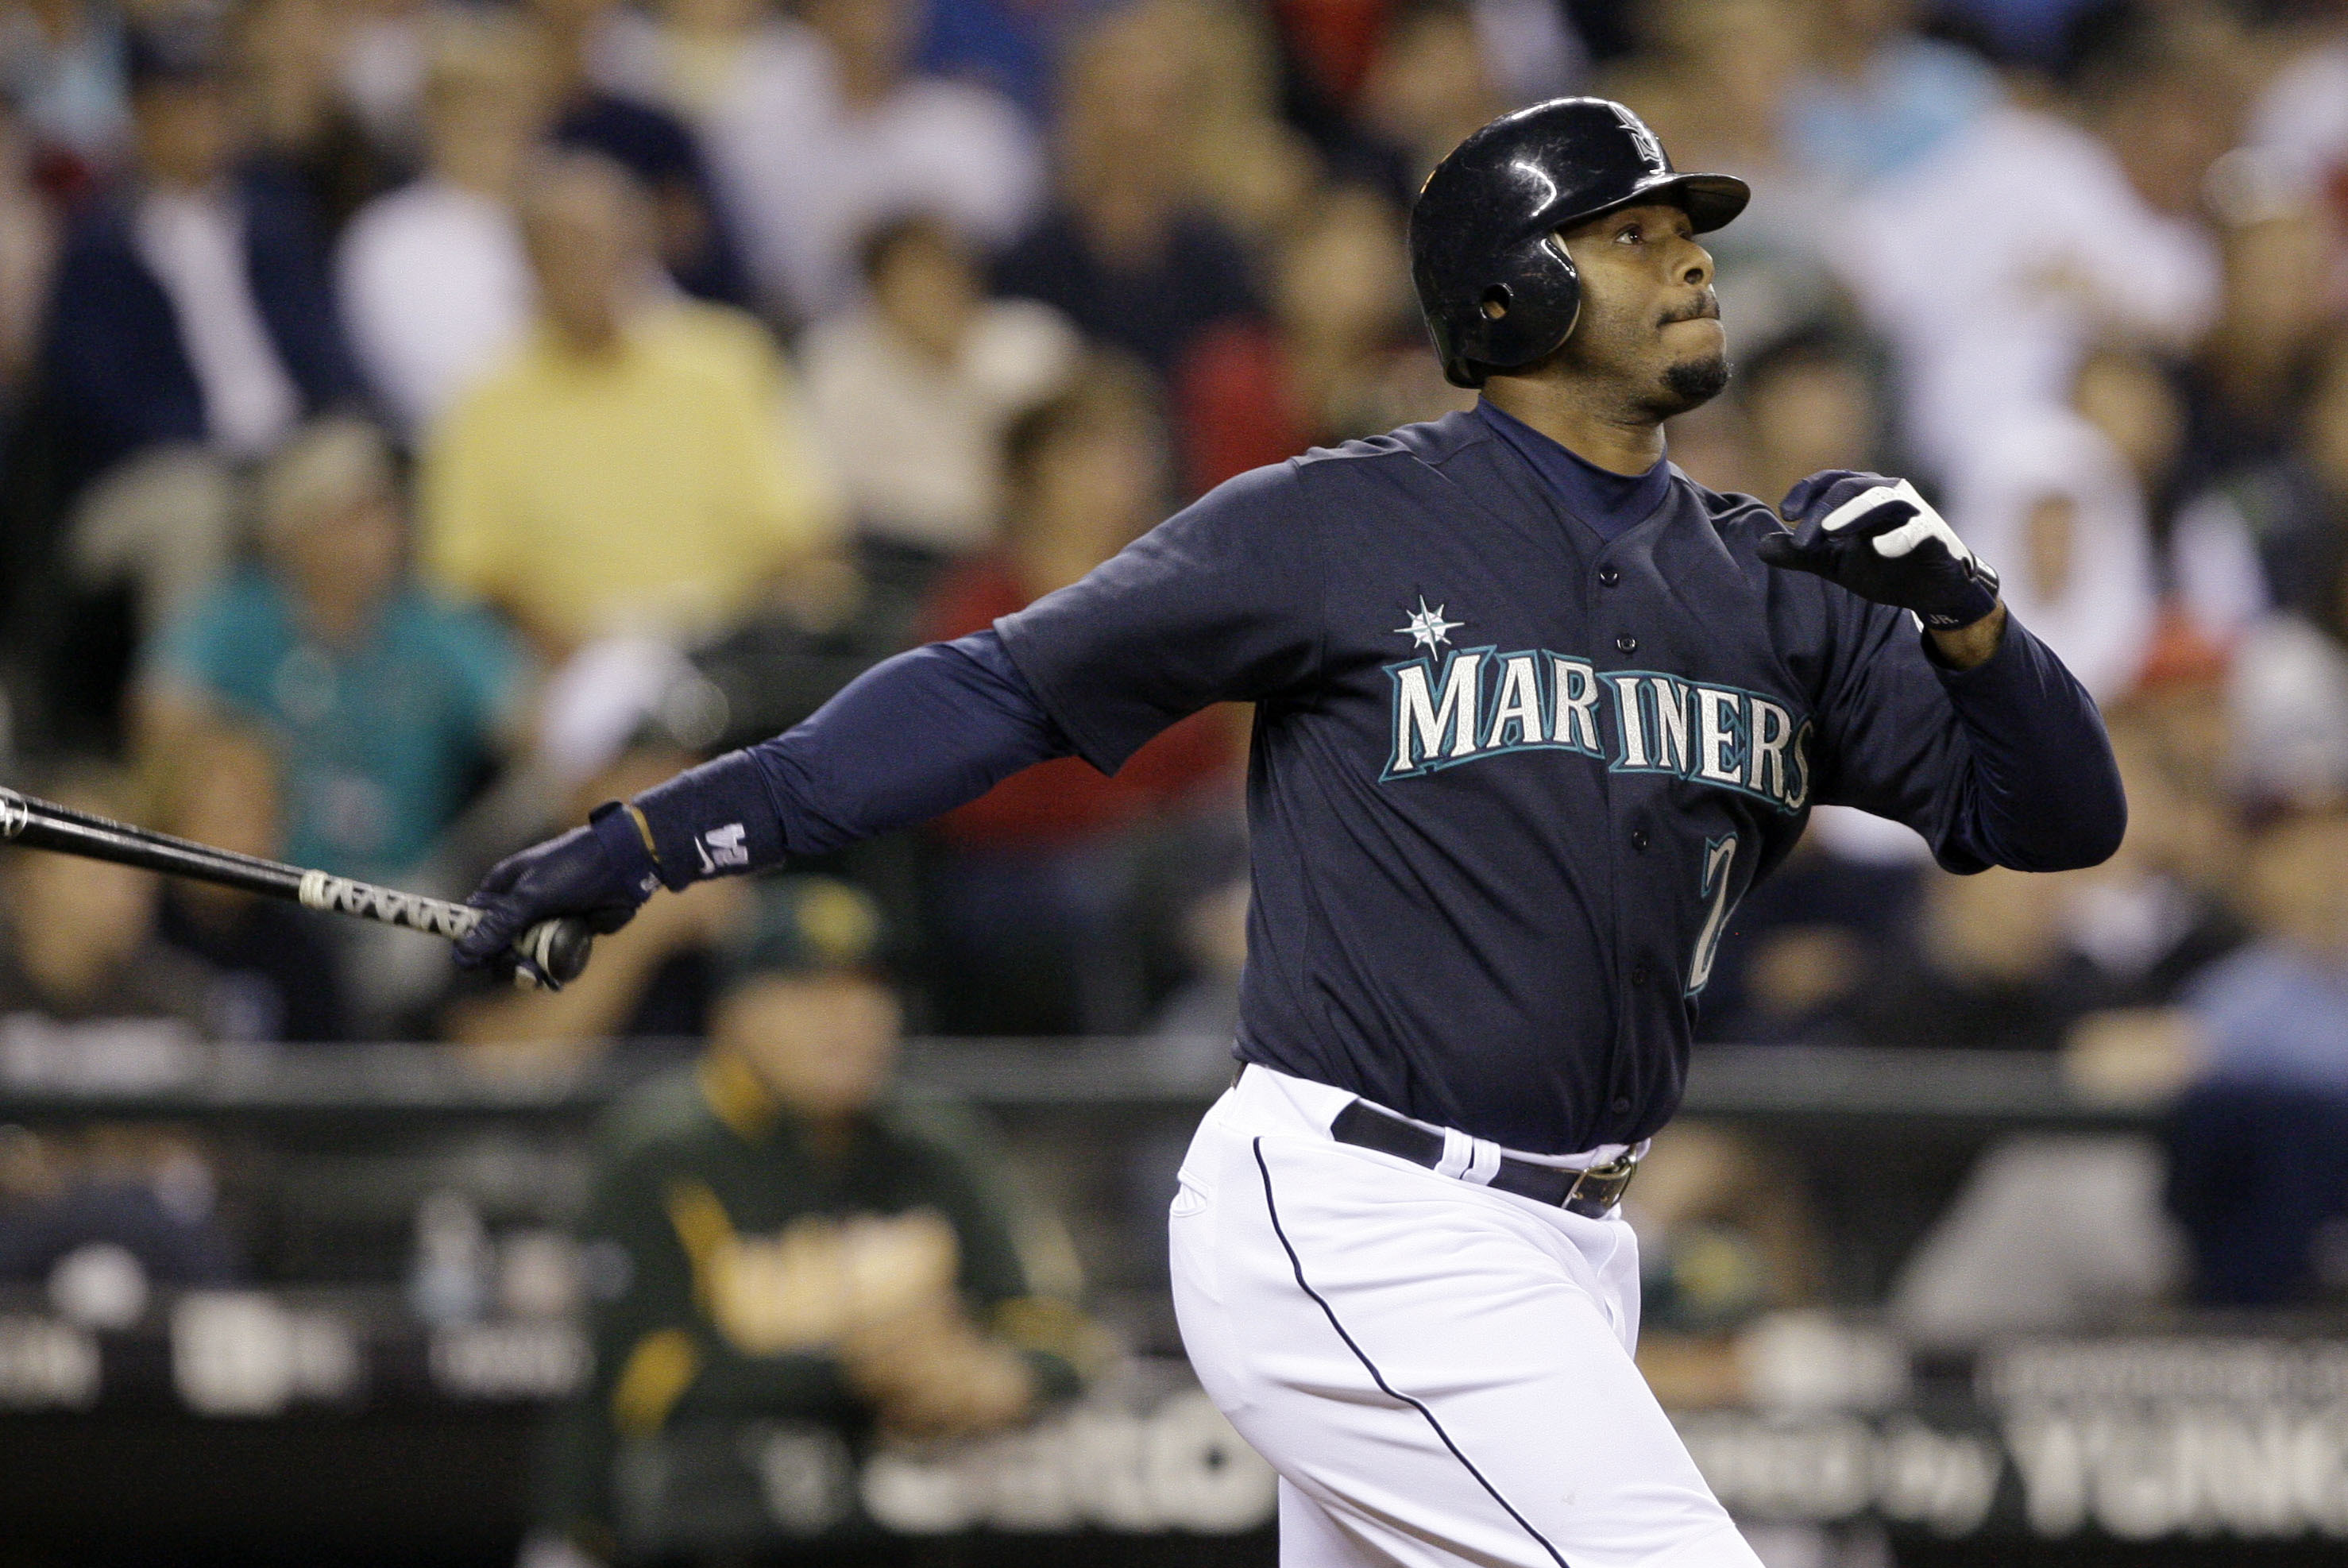 For Hall of Fame-bound Ken Griffey Jr., it all started with the swing